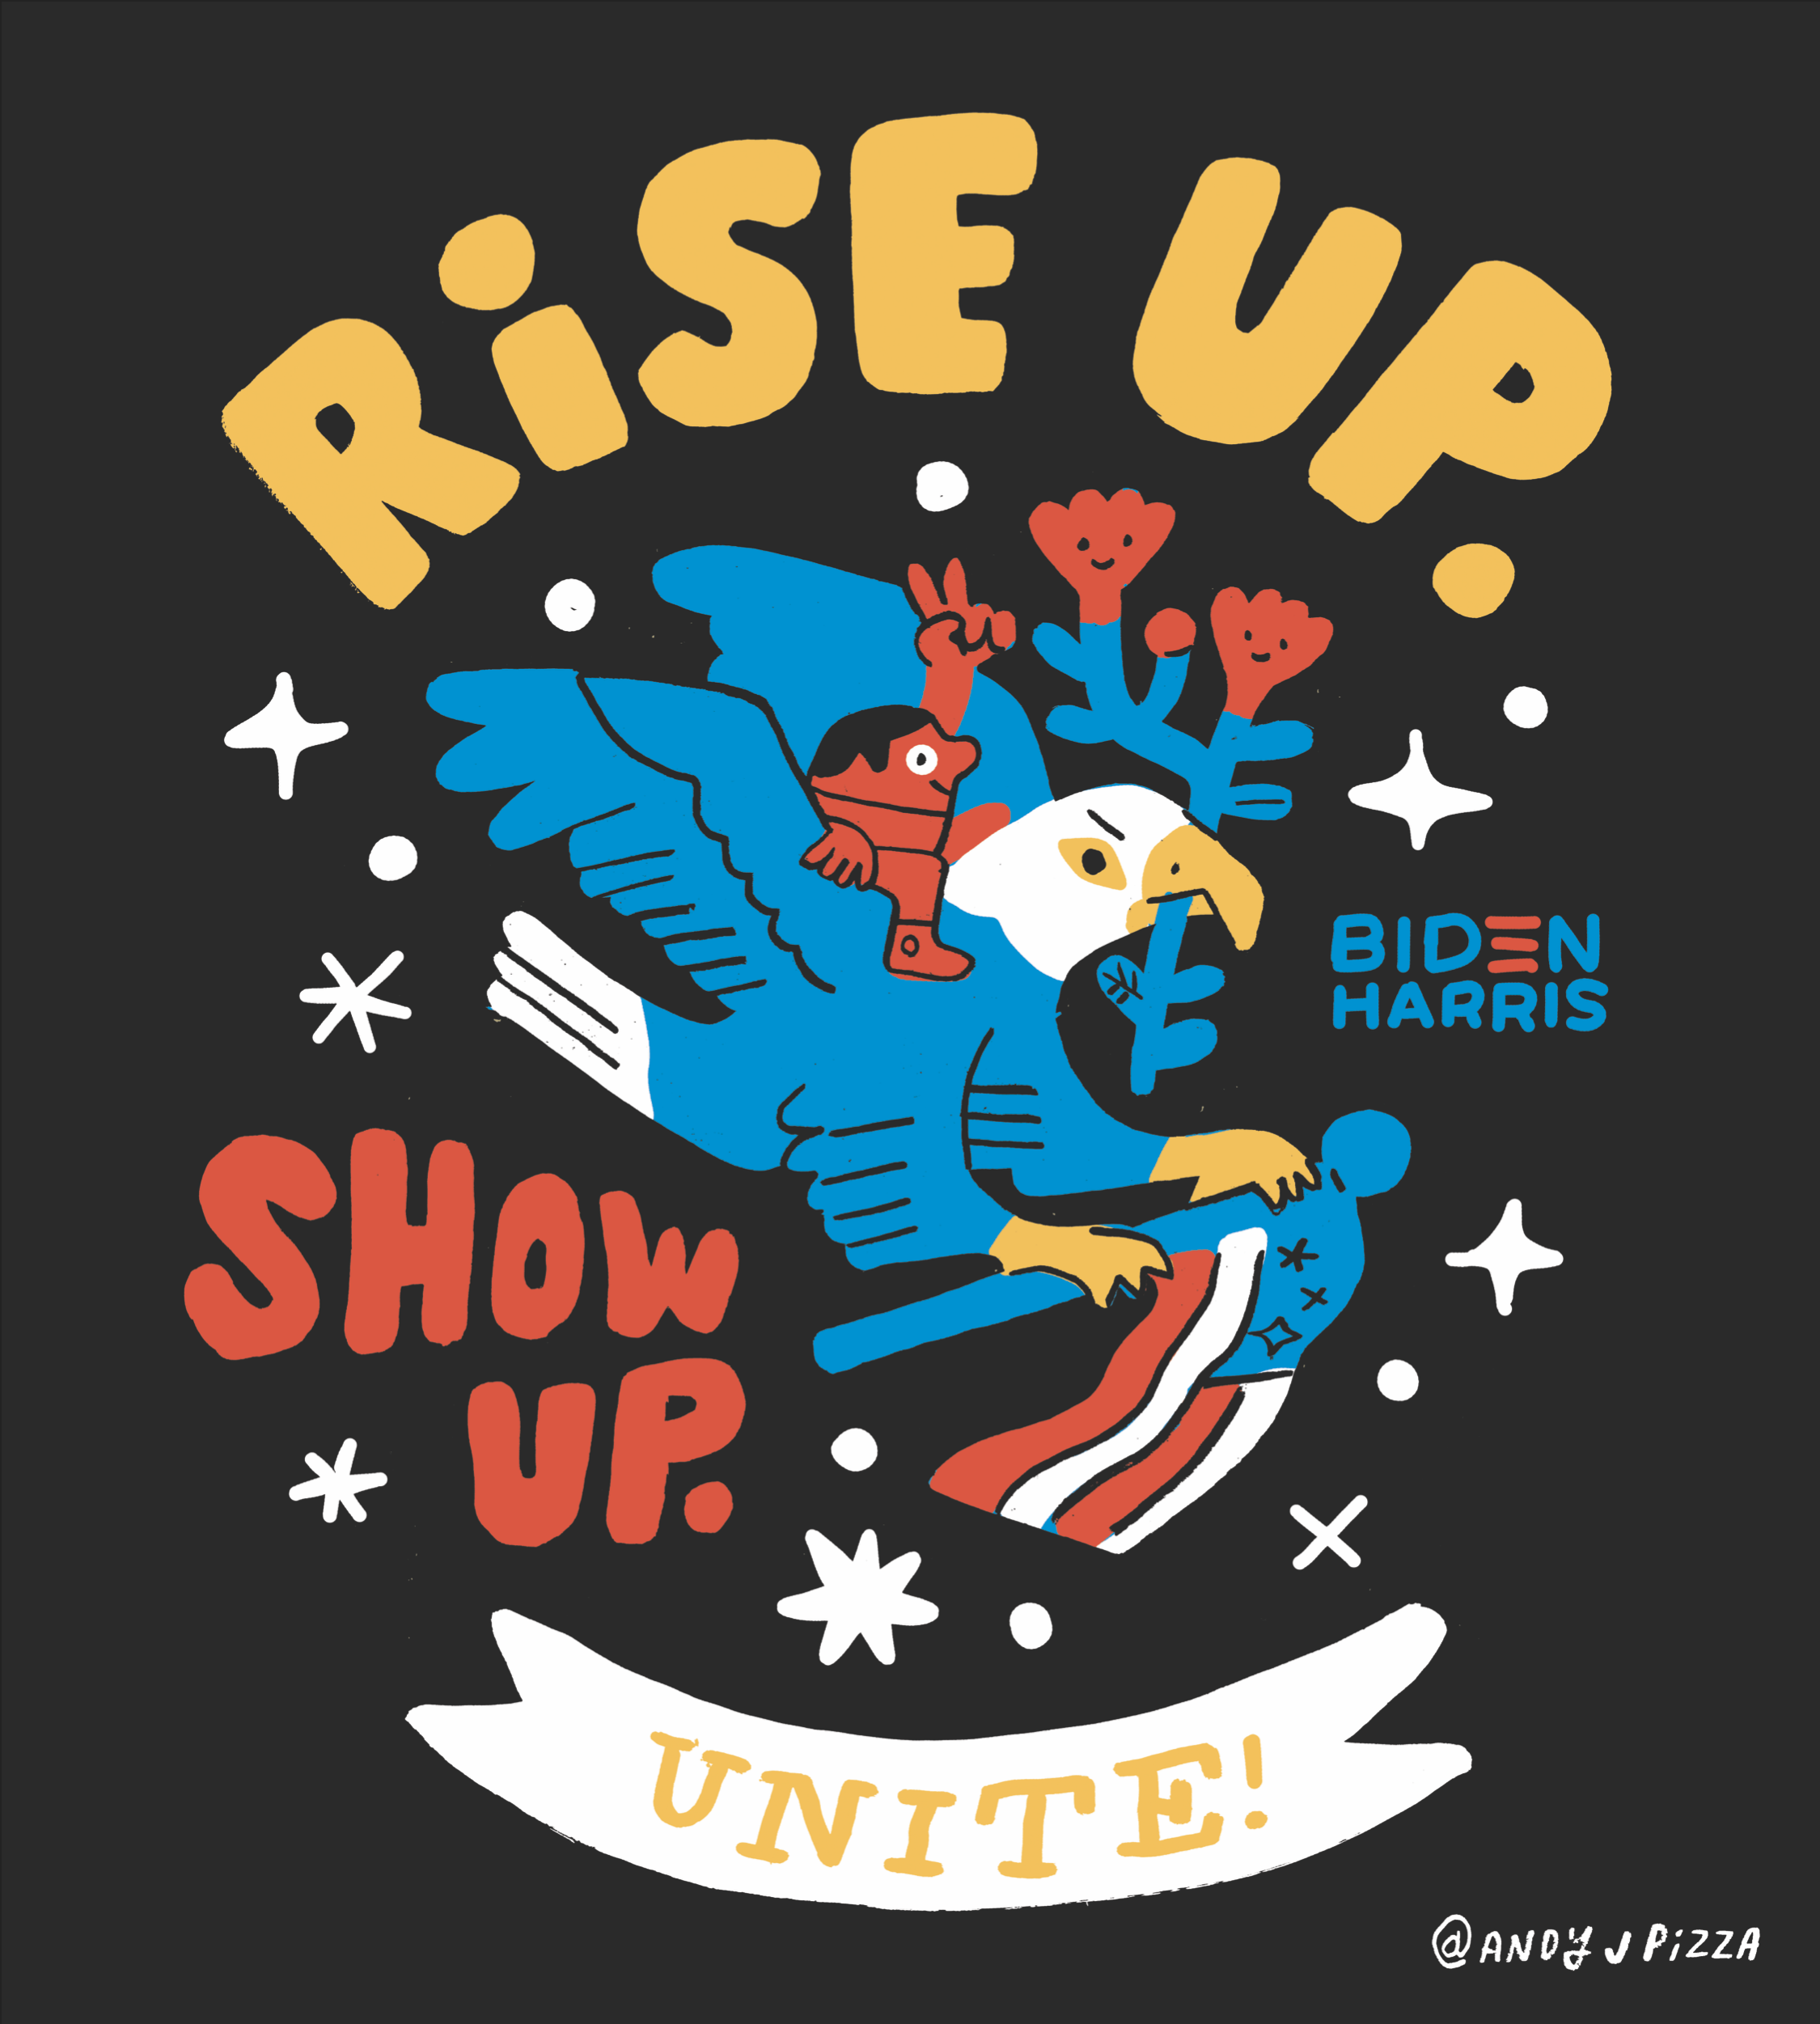 Lettering art of the phrase 'Rise up. Show up. Unite!' by Andy J. Pizza